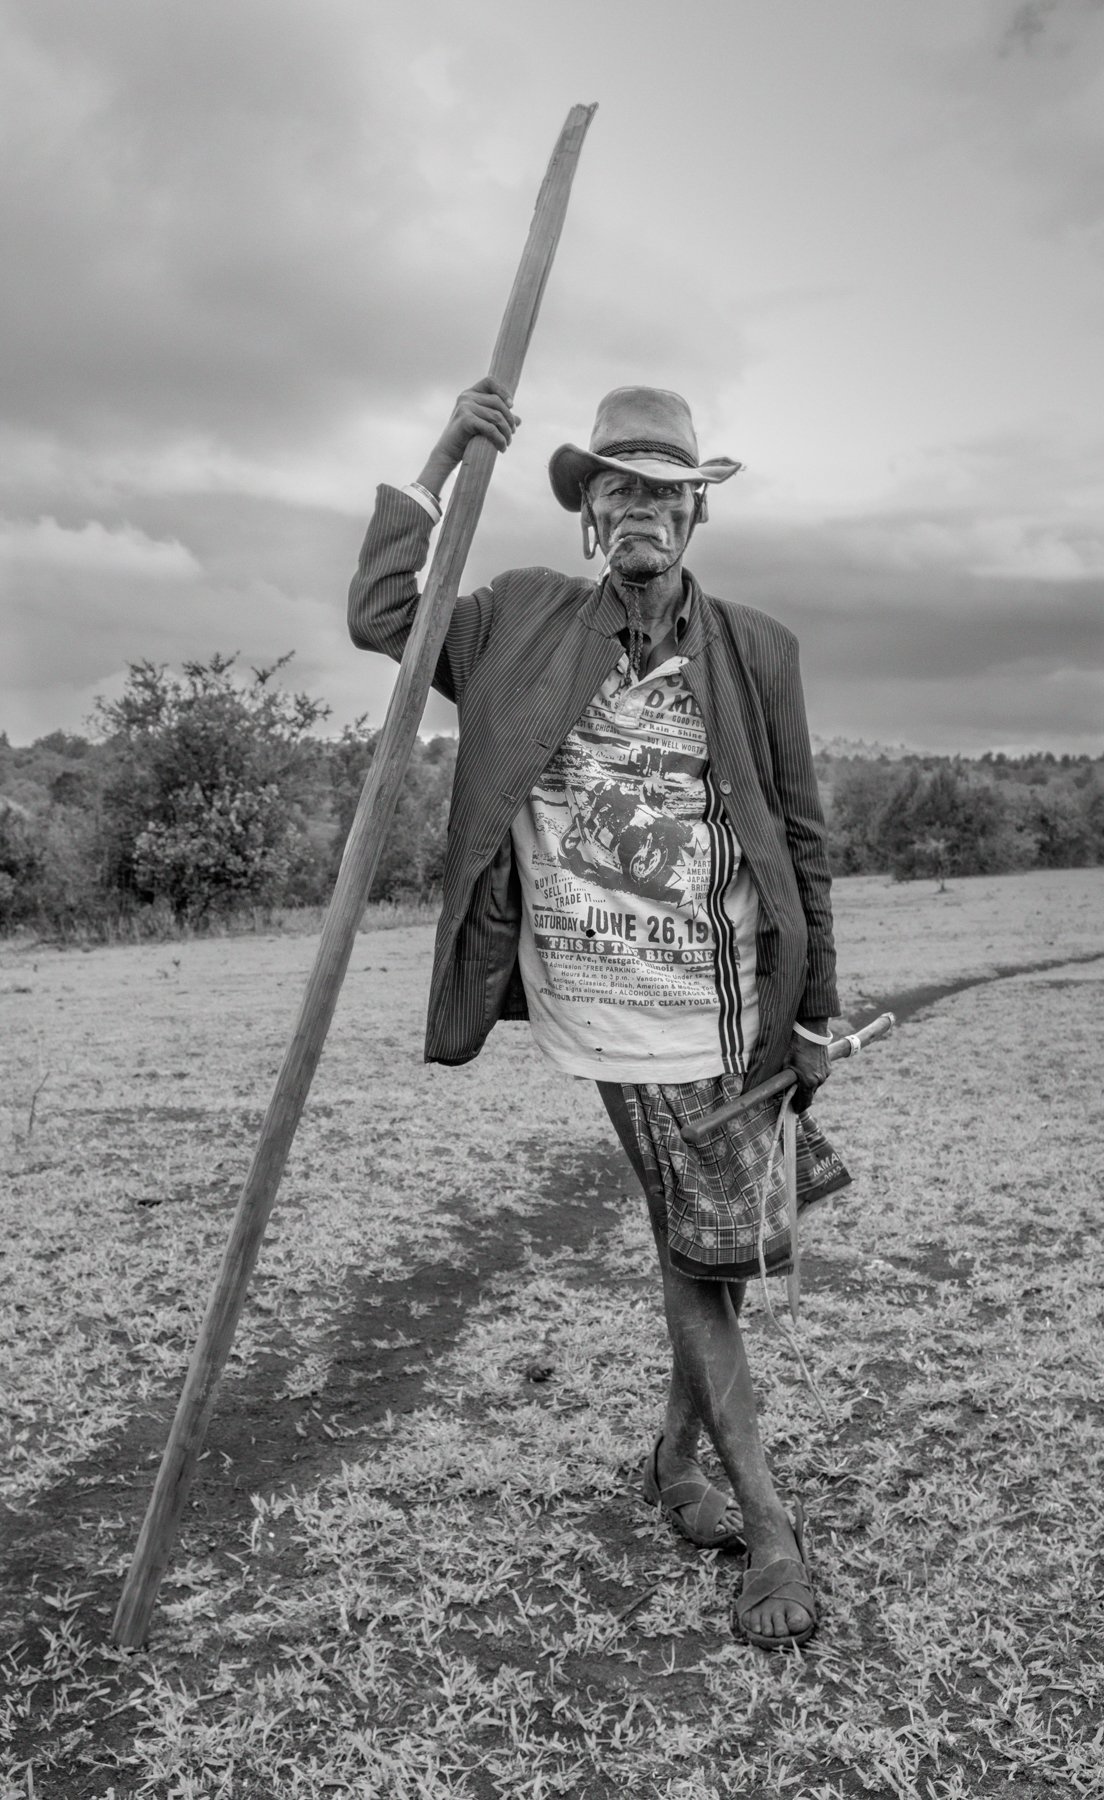  Sioya Kisio, 89 years, poses after returning from herding his cattle and goats. He is John›s older brother and the first born son of Mau Mau general, Kurito Ole Kisio. Nadumoro village, Laikipia county, Kenya.  